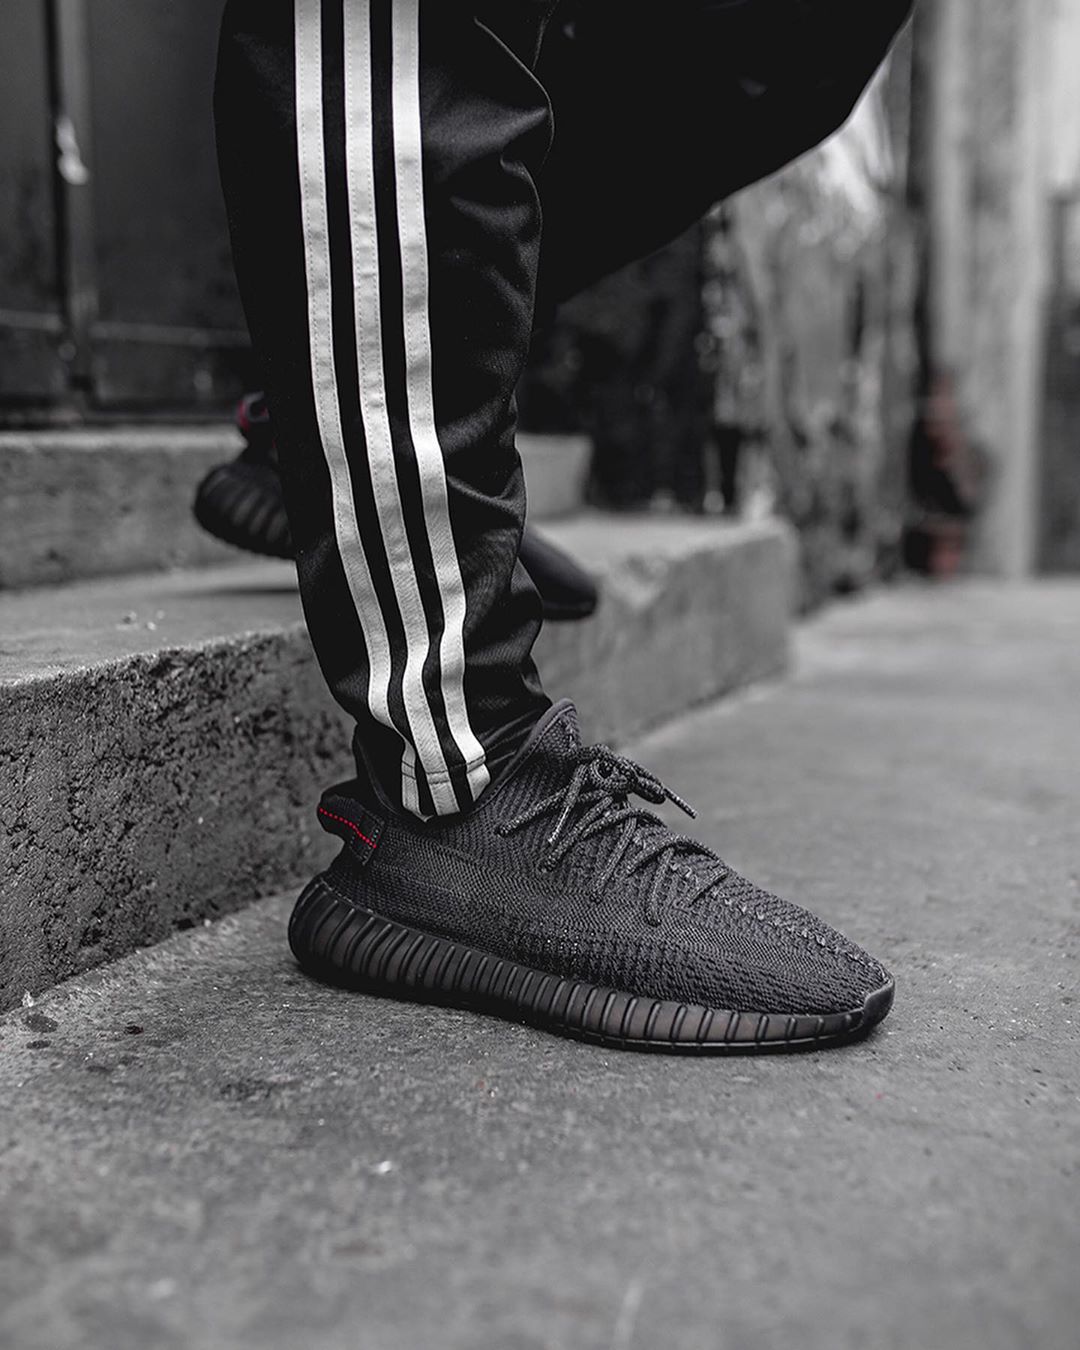 outfit yeezy 5 black